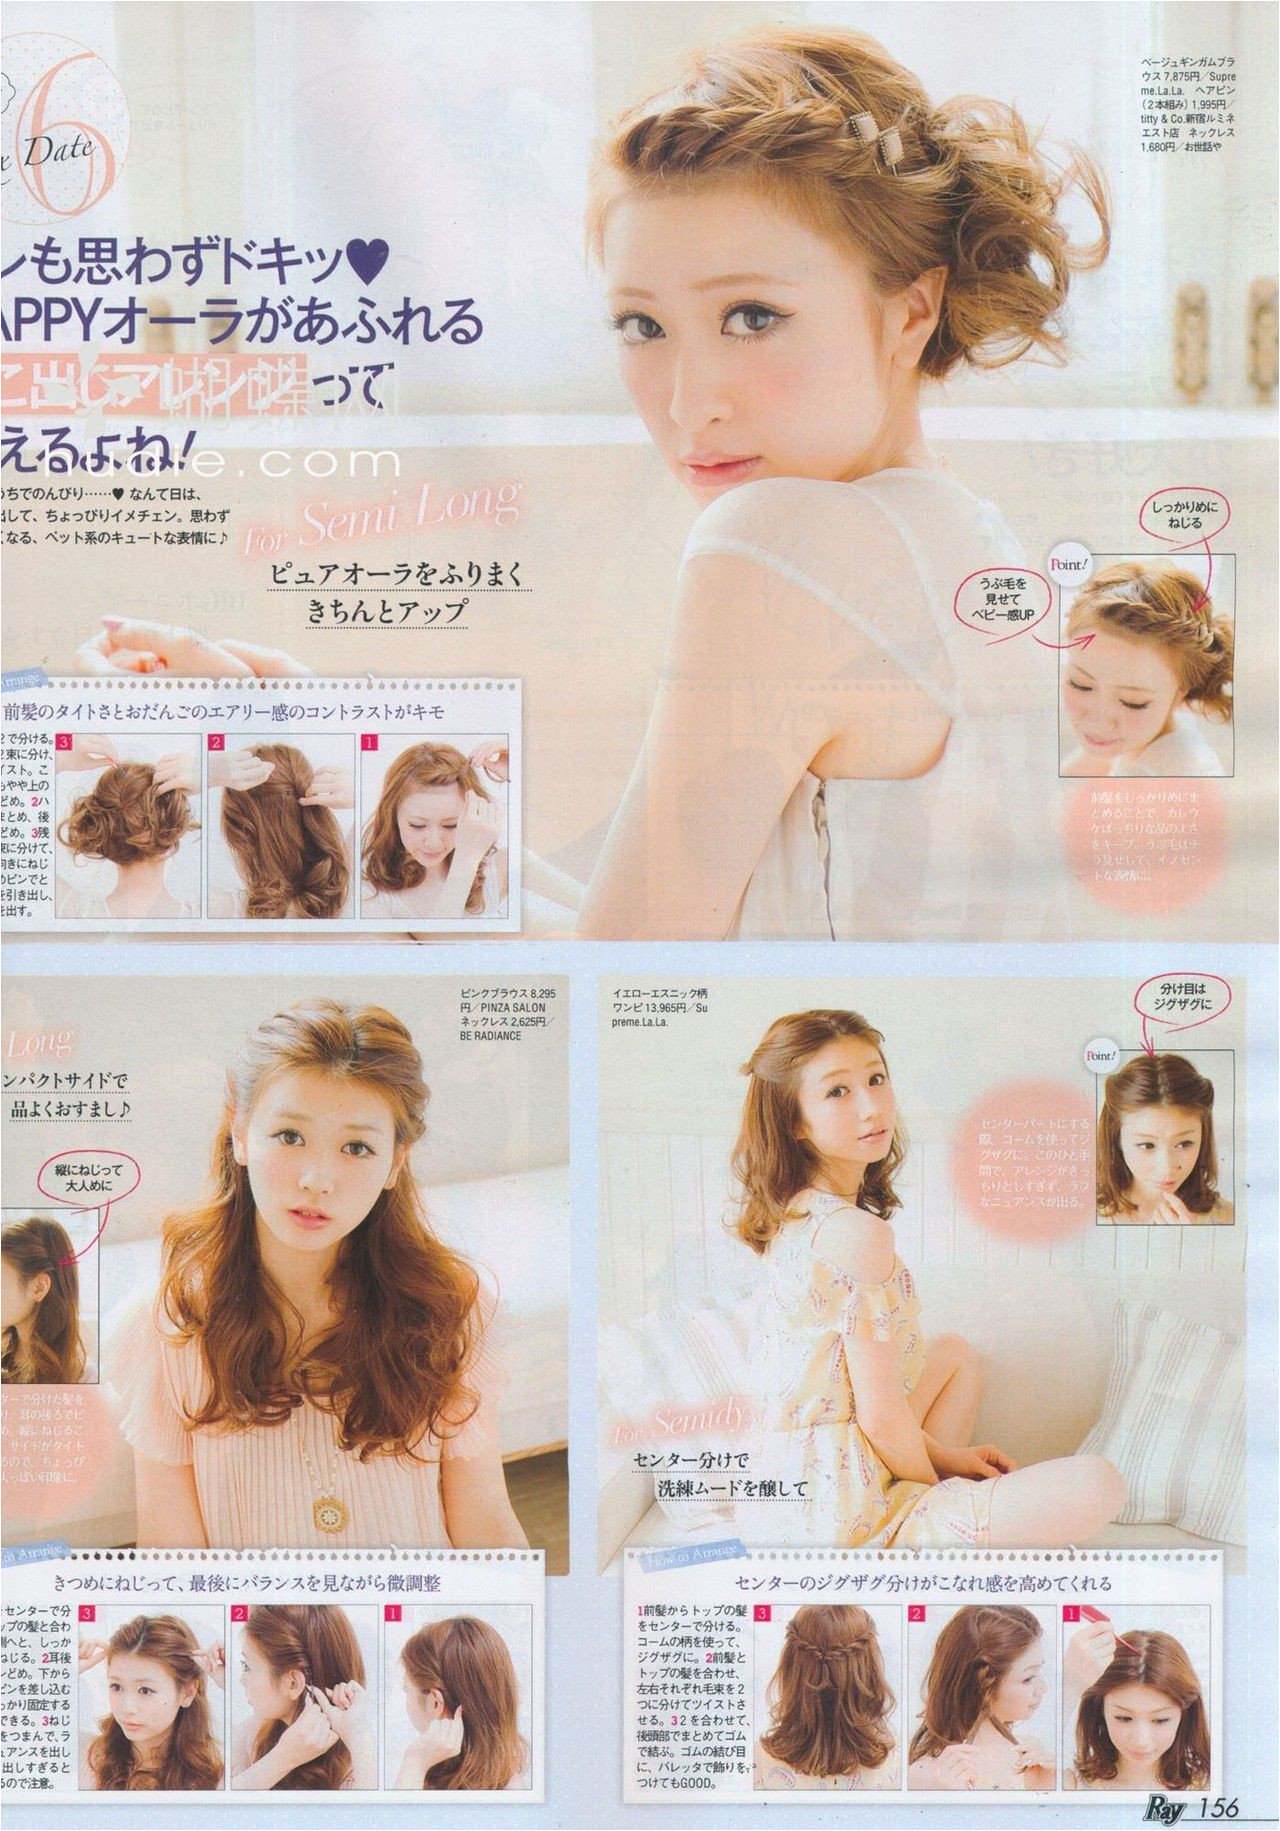 A collection of hair makeup & nails tutorials from magazines in Japan for all those who love the